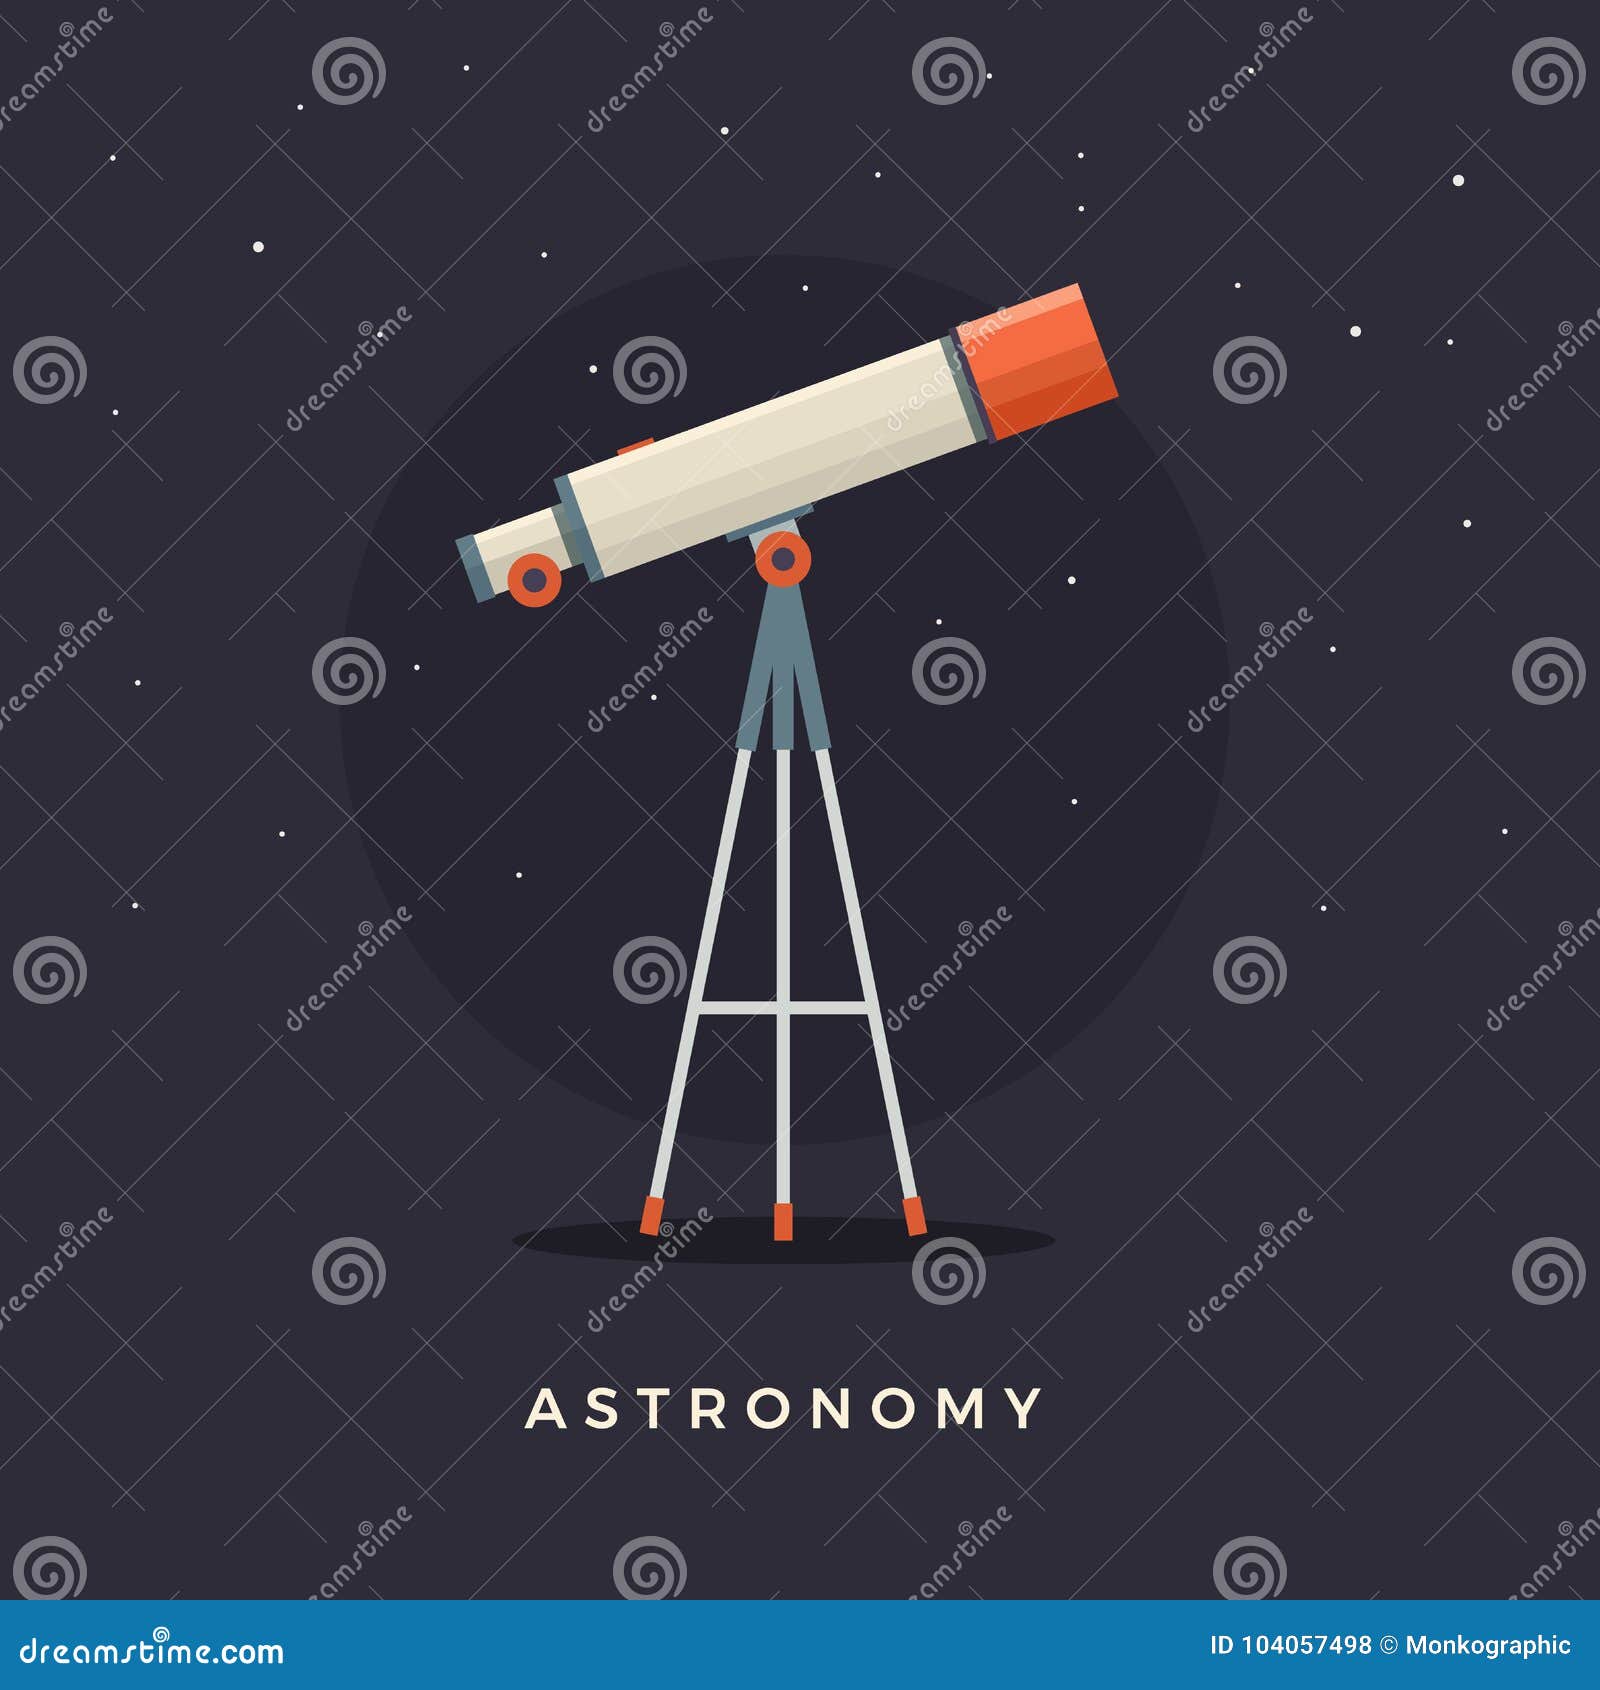 telescope on support to observe stars. astronomy.